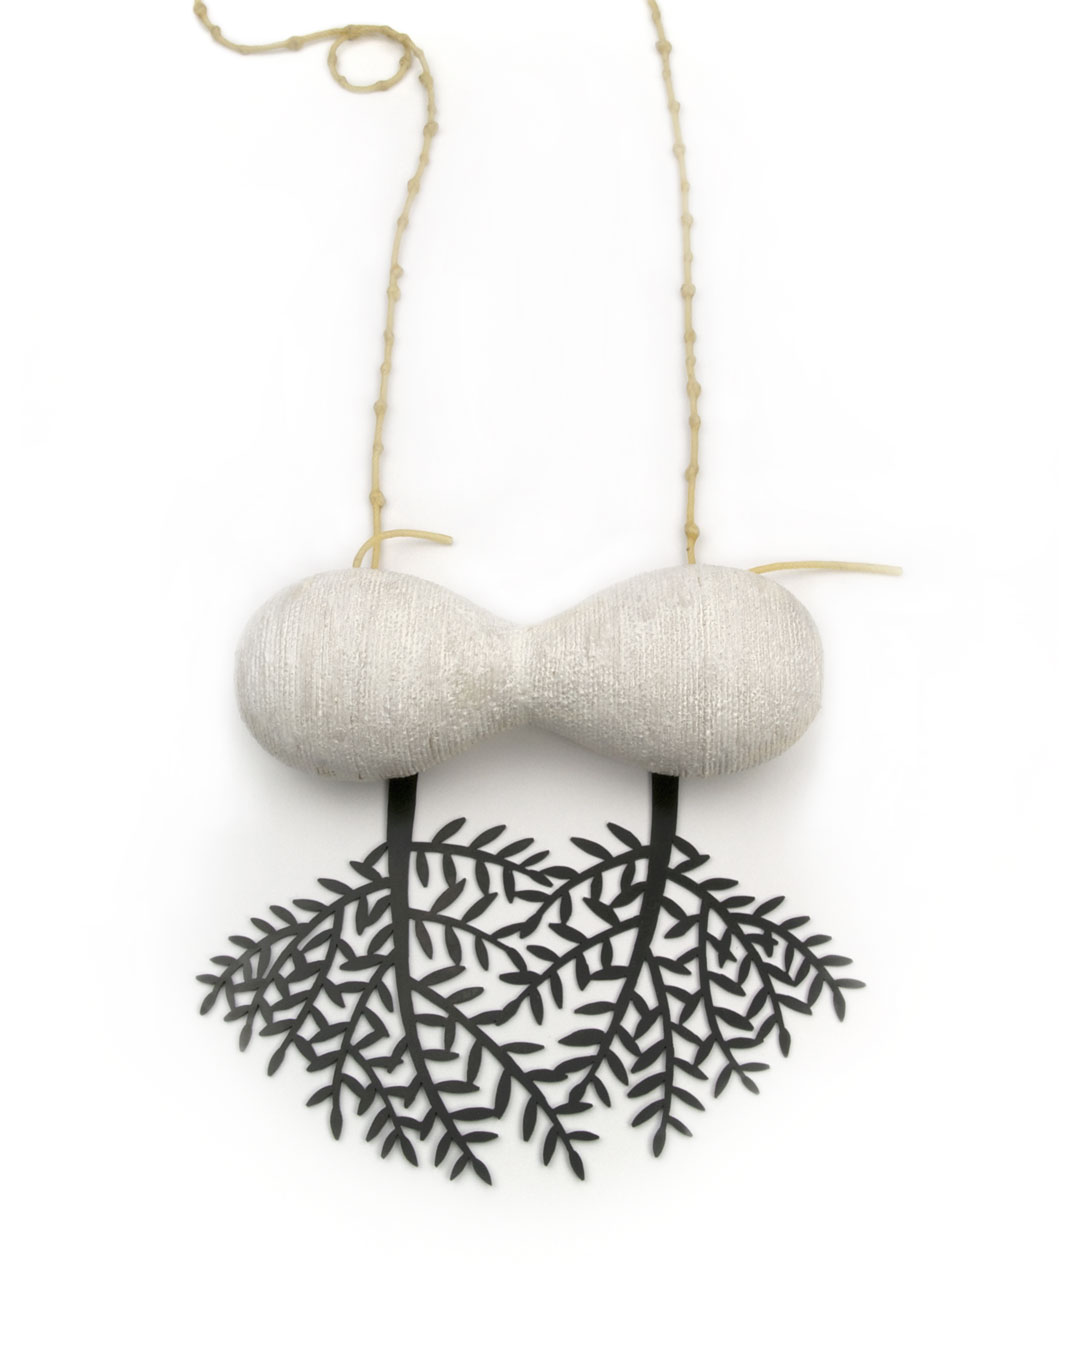 Dongchun Lee, Breathe, 2009, necklace; cord, iron, paint, 155 x 152 x 40 mm, €1115